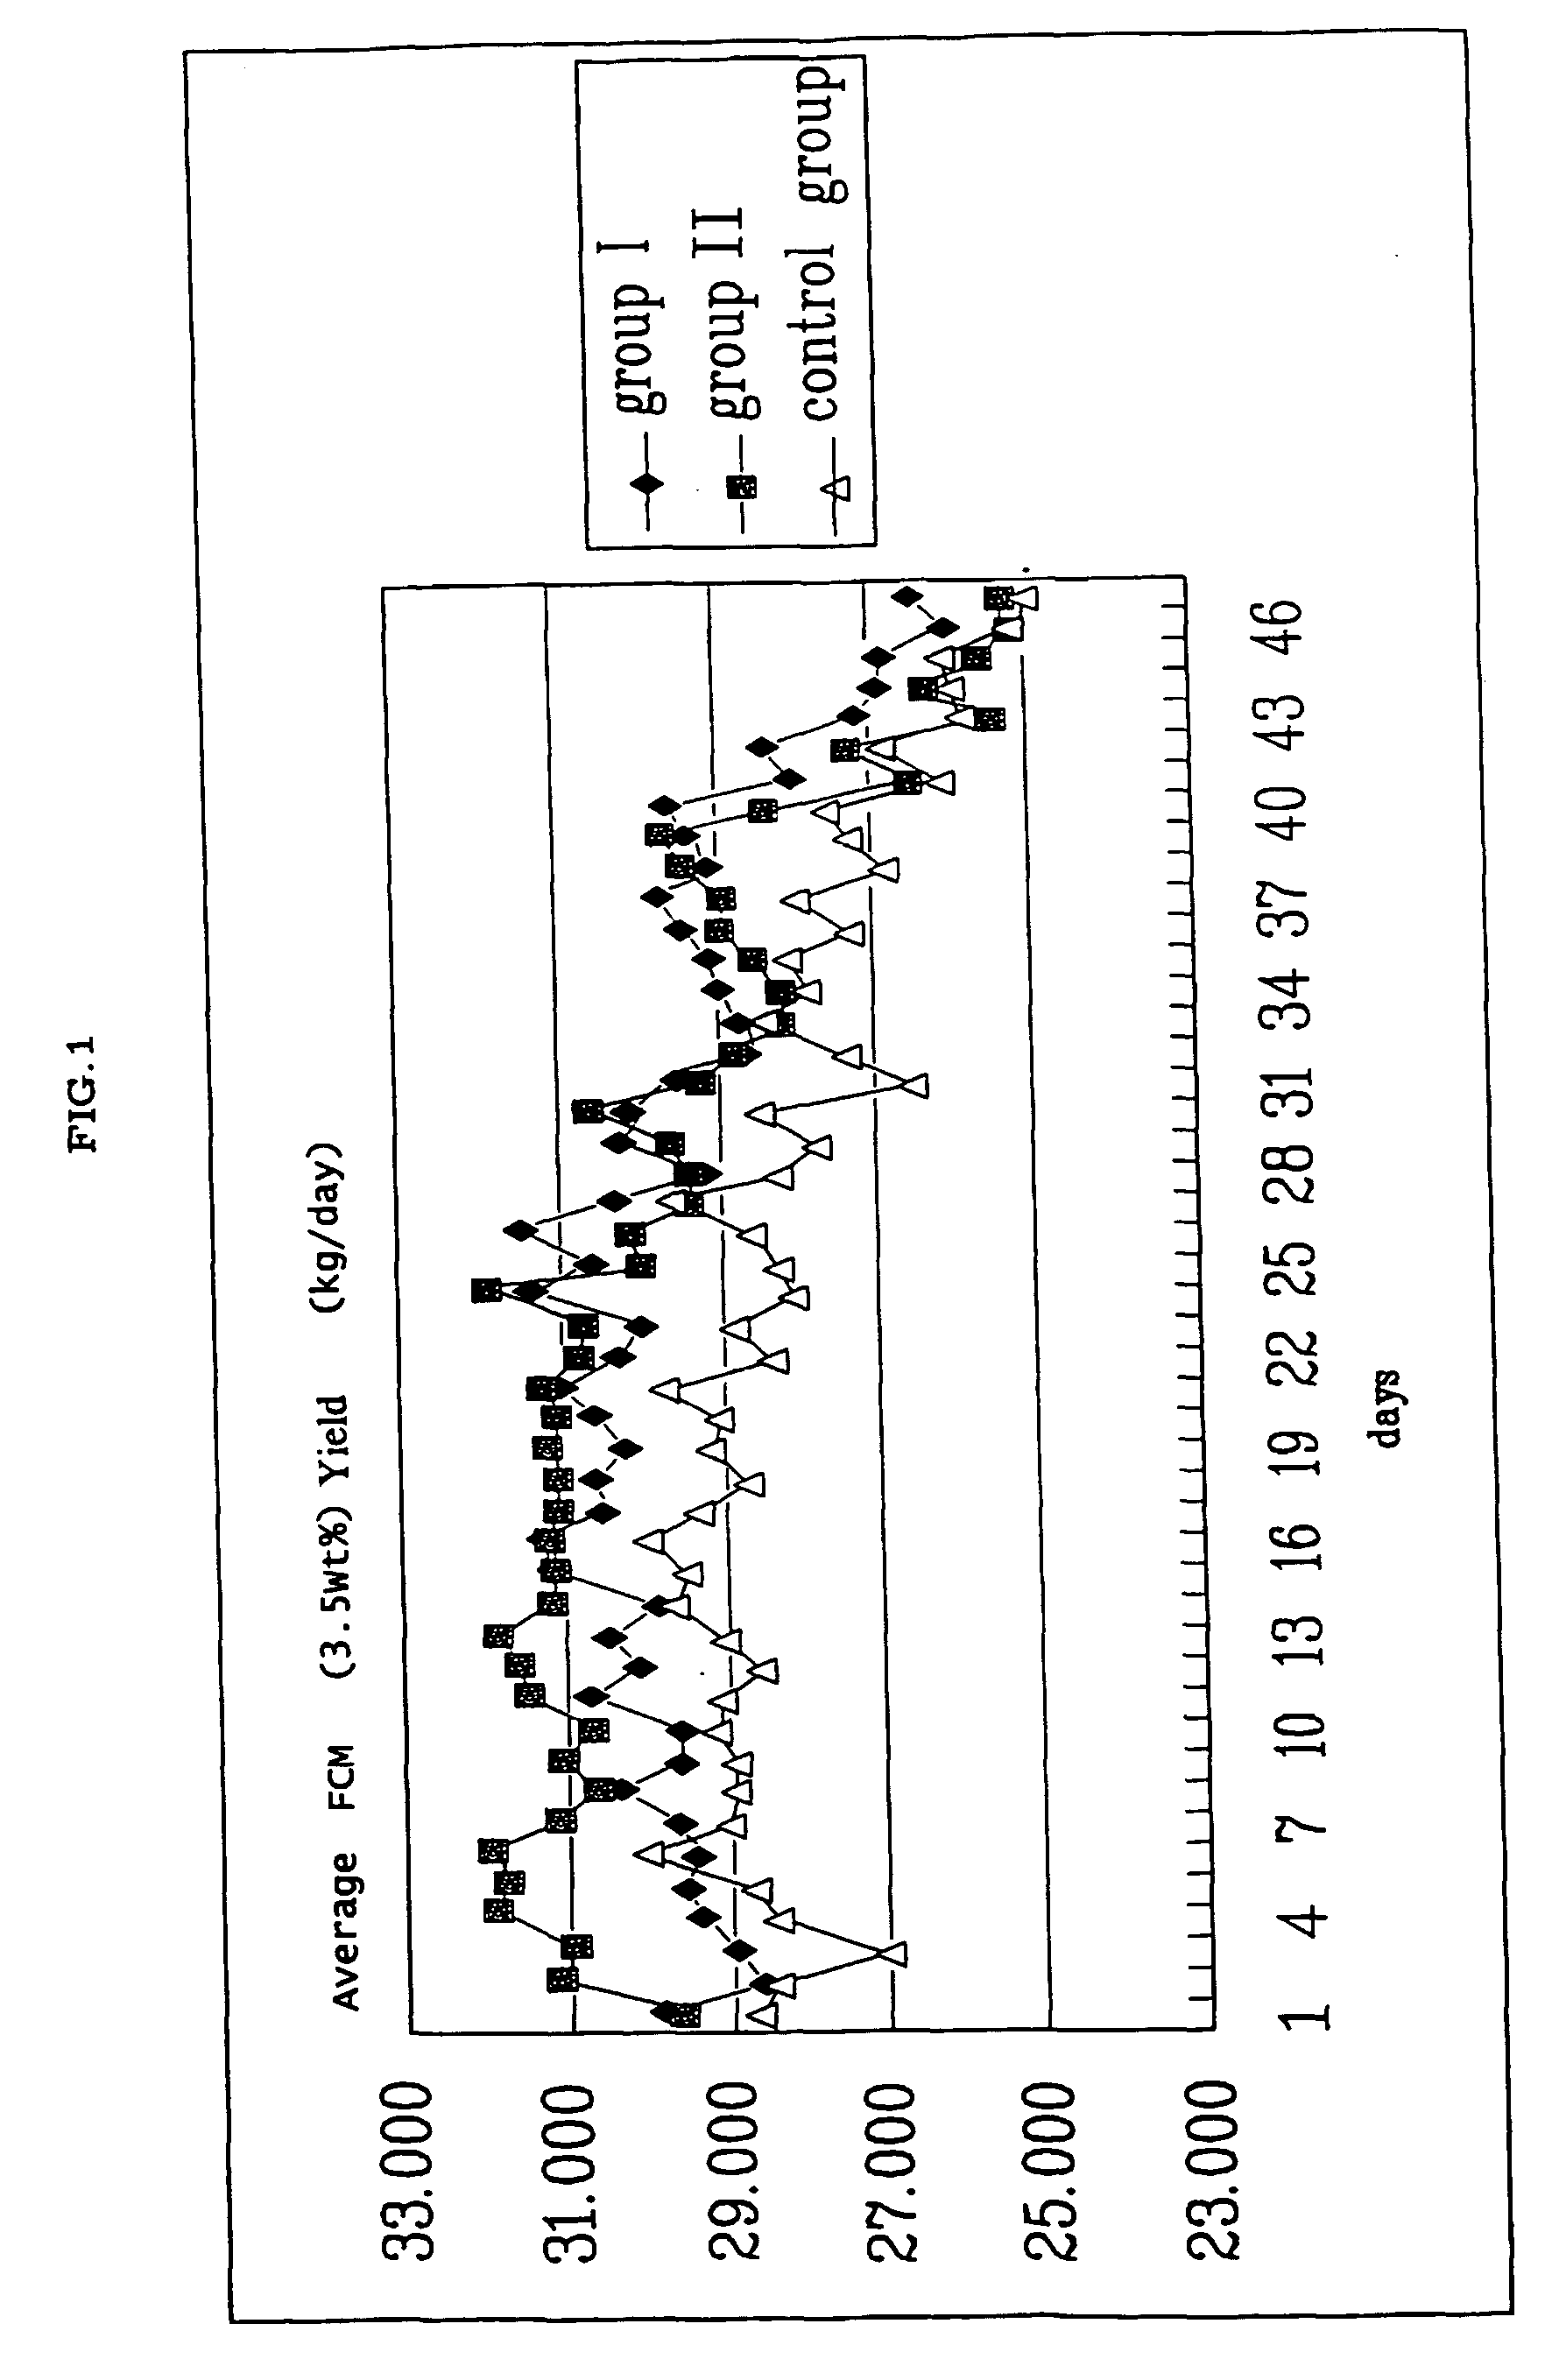 Composition comprising cysteamine for improving lactation in dairy animals